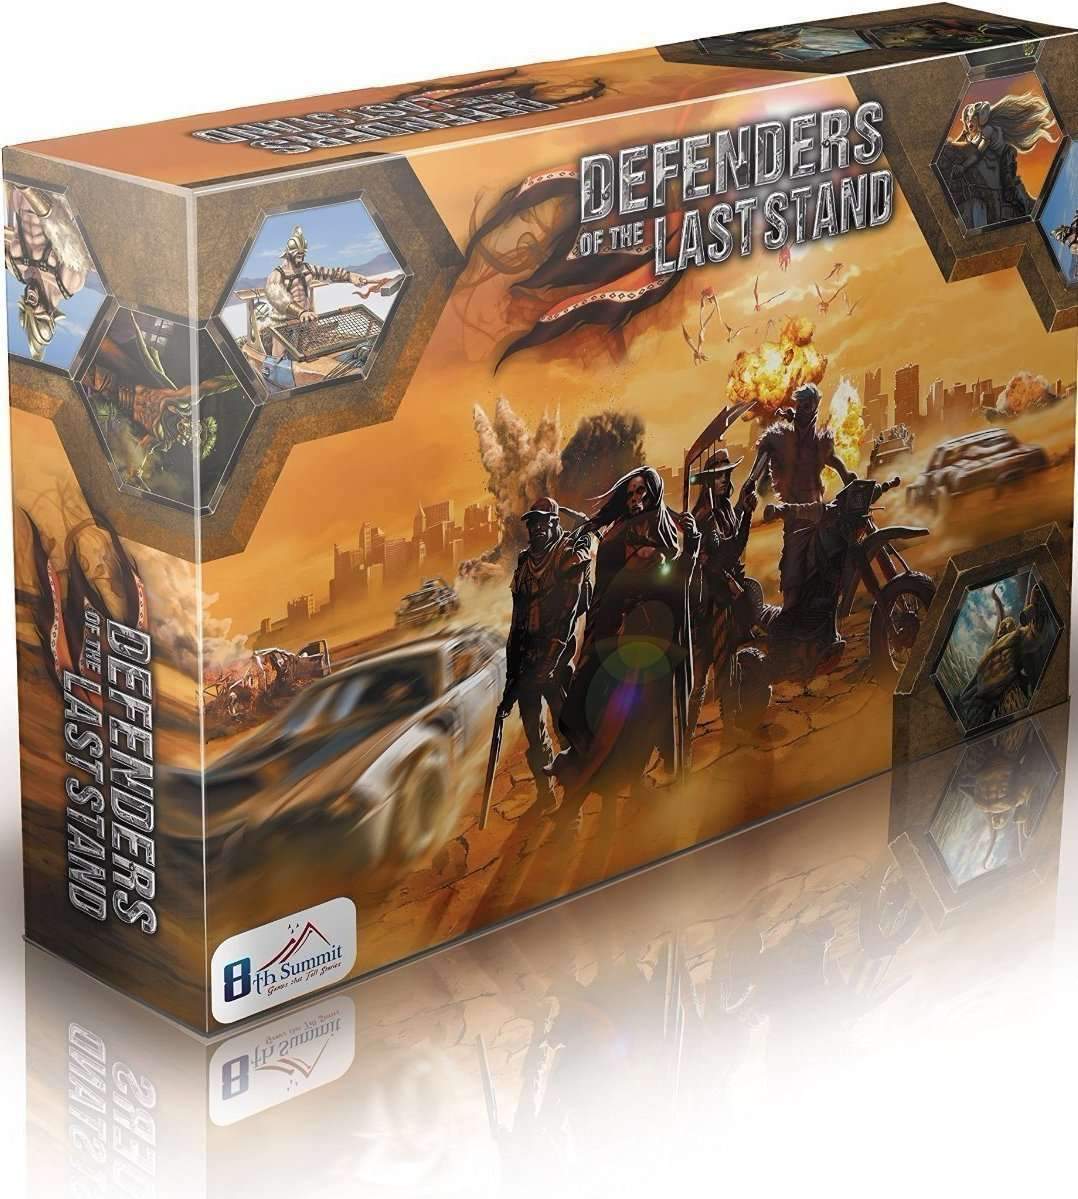 Defenders of the Last Stand - Game Board (Kickstarter Special) Kickstarter Board Game 8th Summit